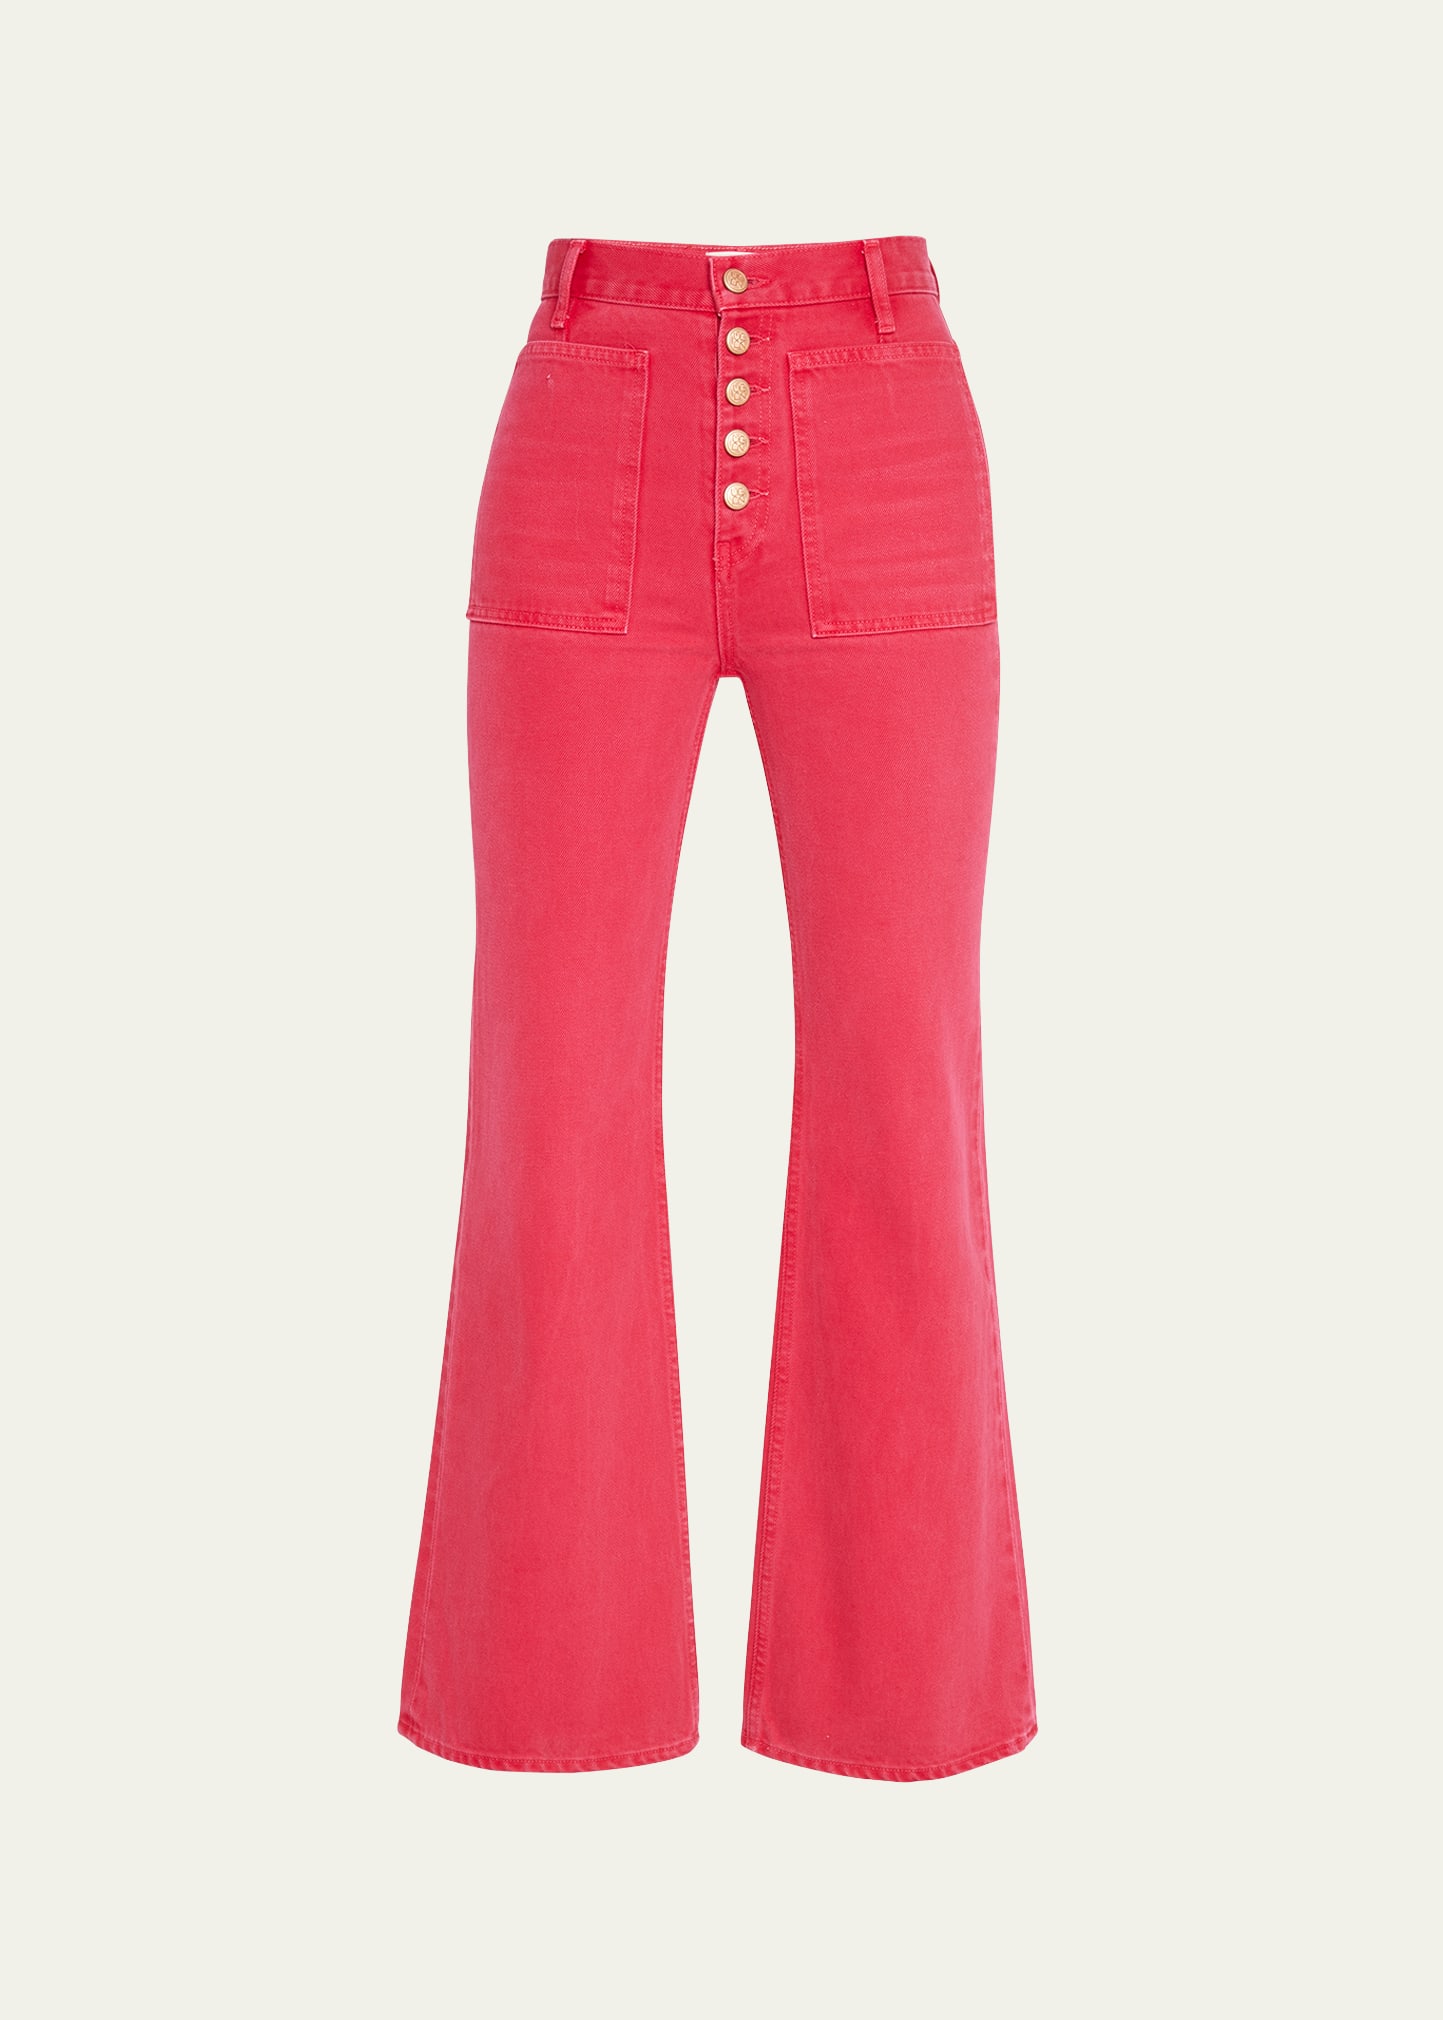 Ulla Johnson The Lou Denim Flare Jeans In Orchid Wash | ModeSens